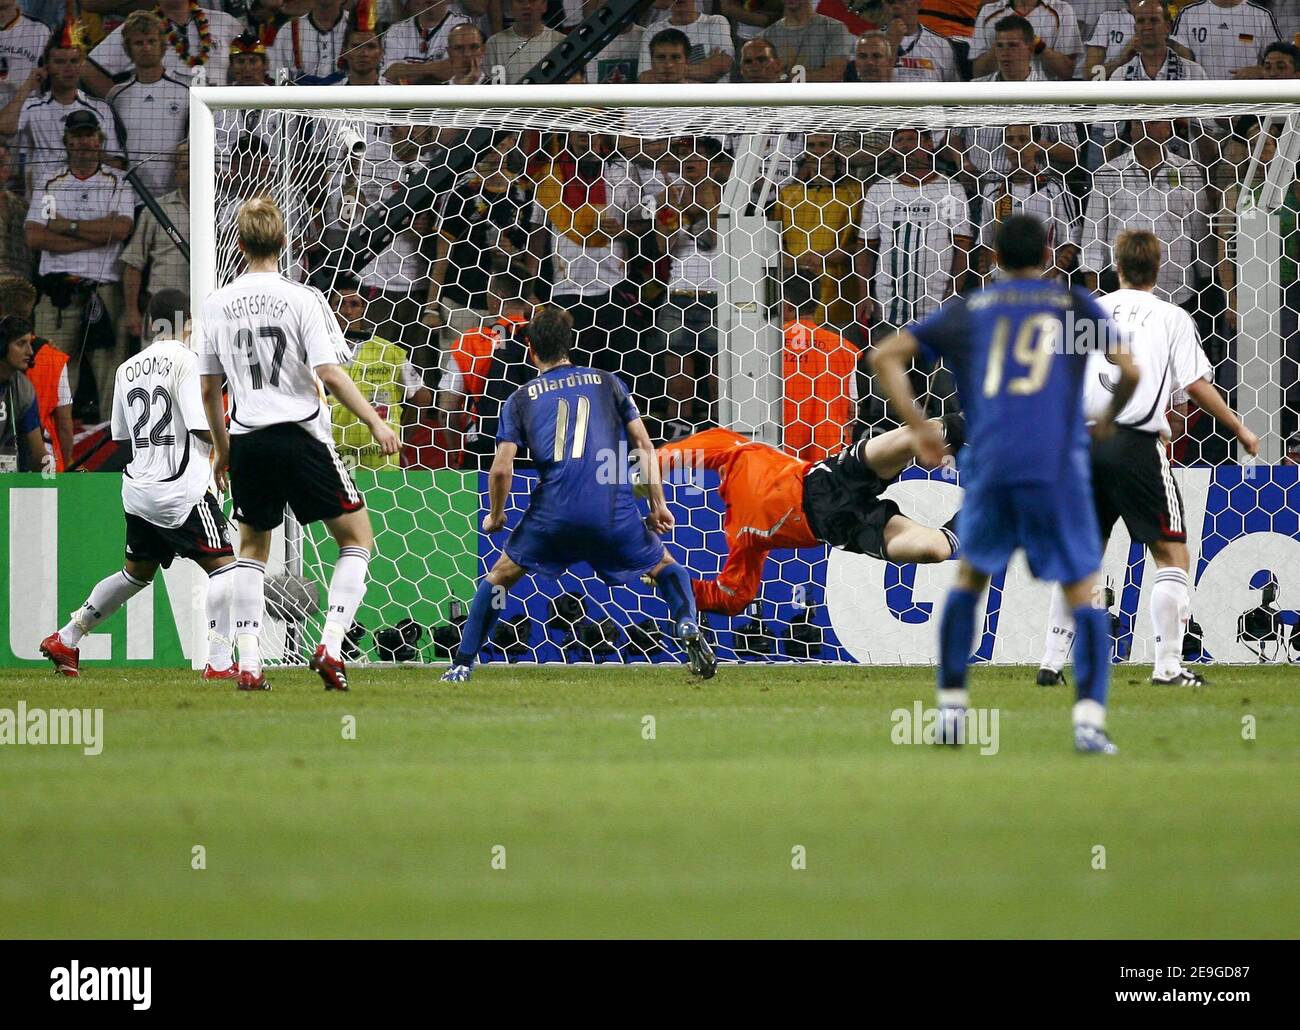 Italy's Fabio Grosso scores the first goal during the World Cup 2006, semifinals, Italy vs Germany at the Signal Iduna Park stadium in Dortmund, Germany on July 4, 2006. Italy won 2-0. Photo by Christian Liewig/ABACAPRESS.COM Stock Photo